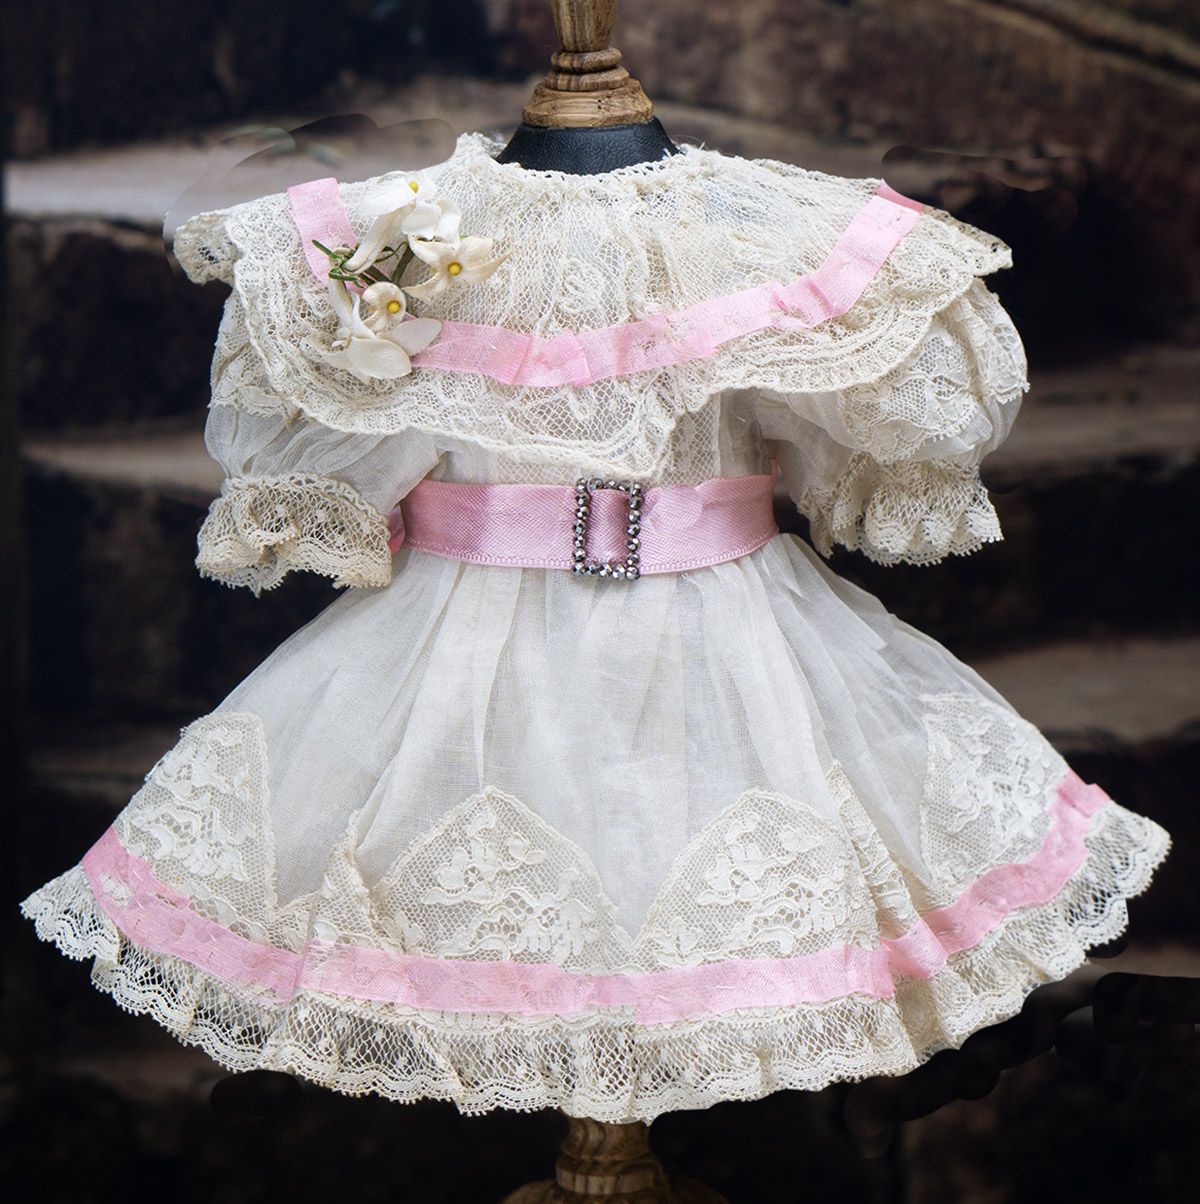 Antique doll dress and chemise